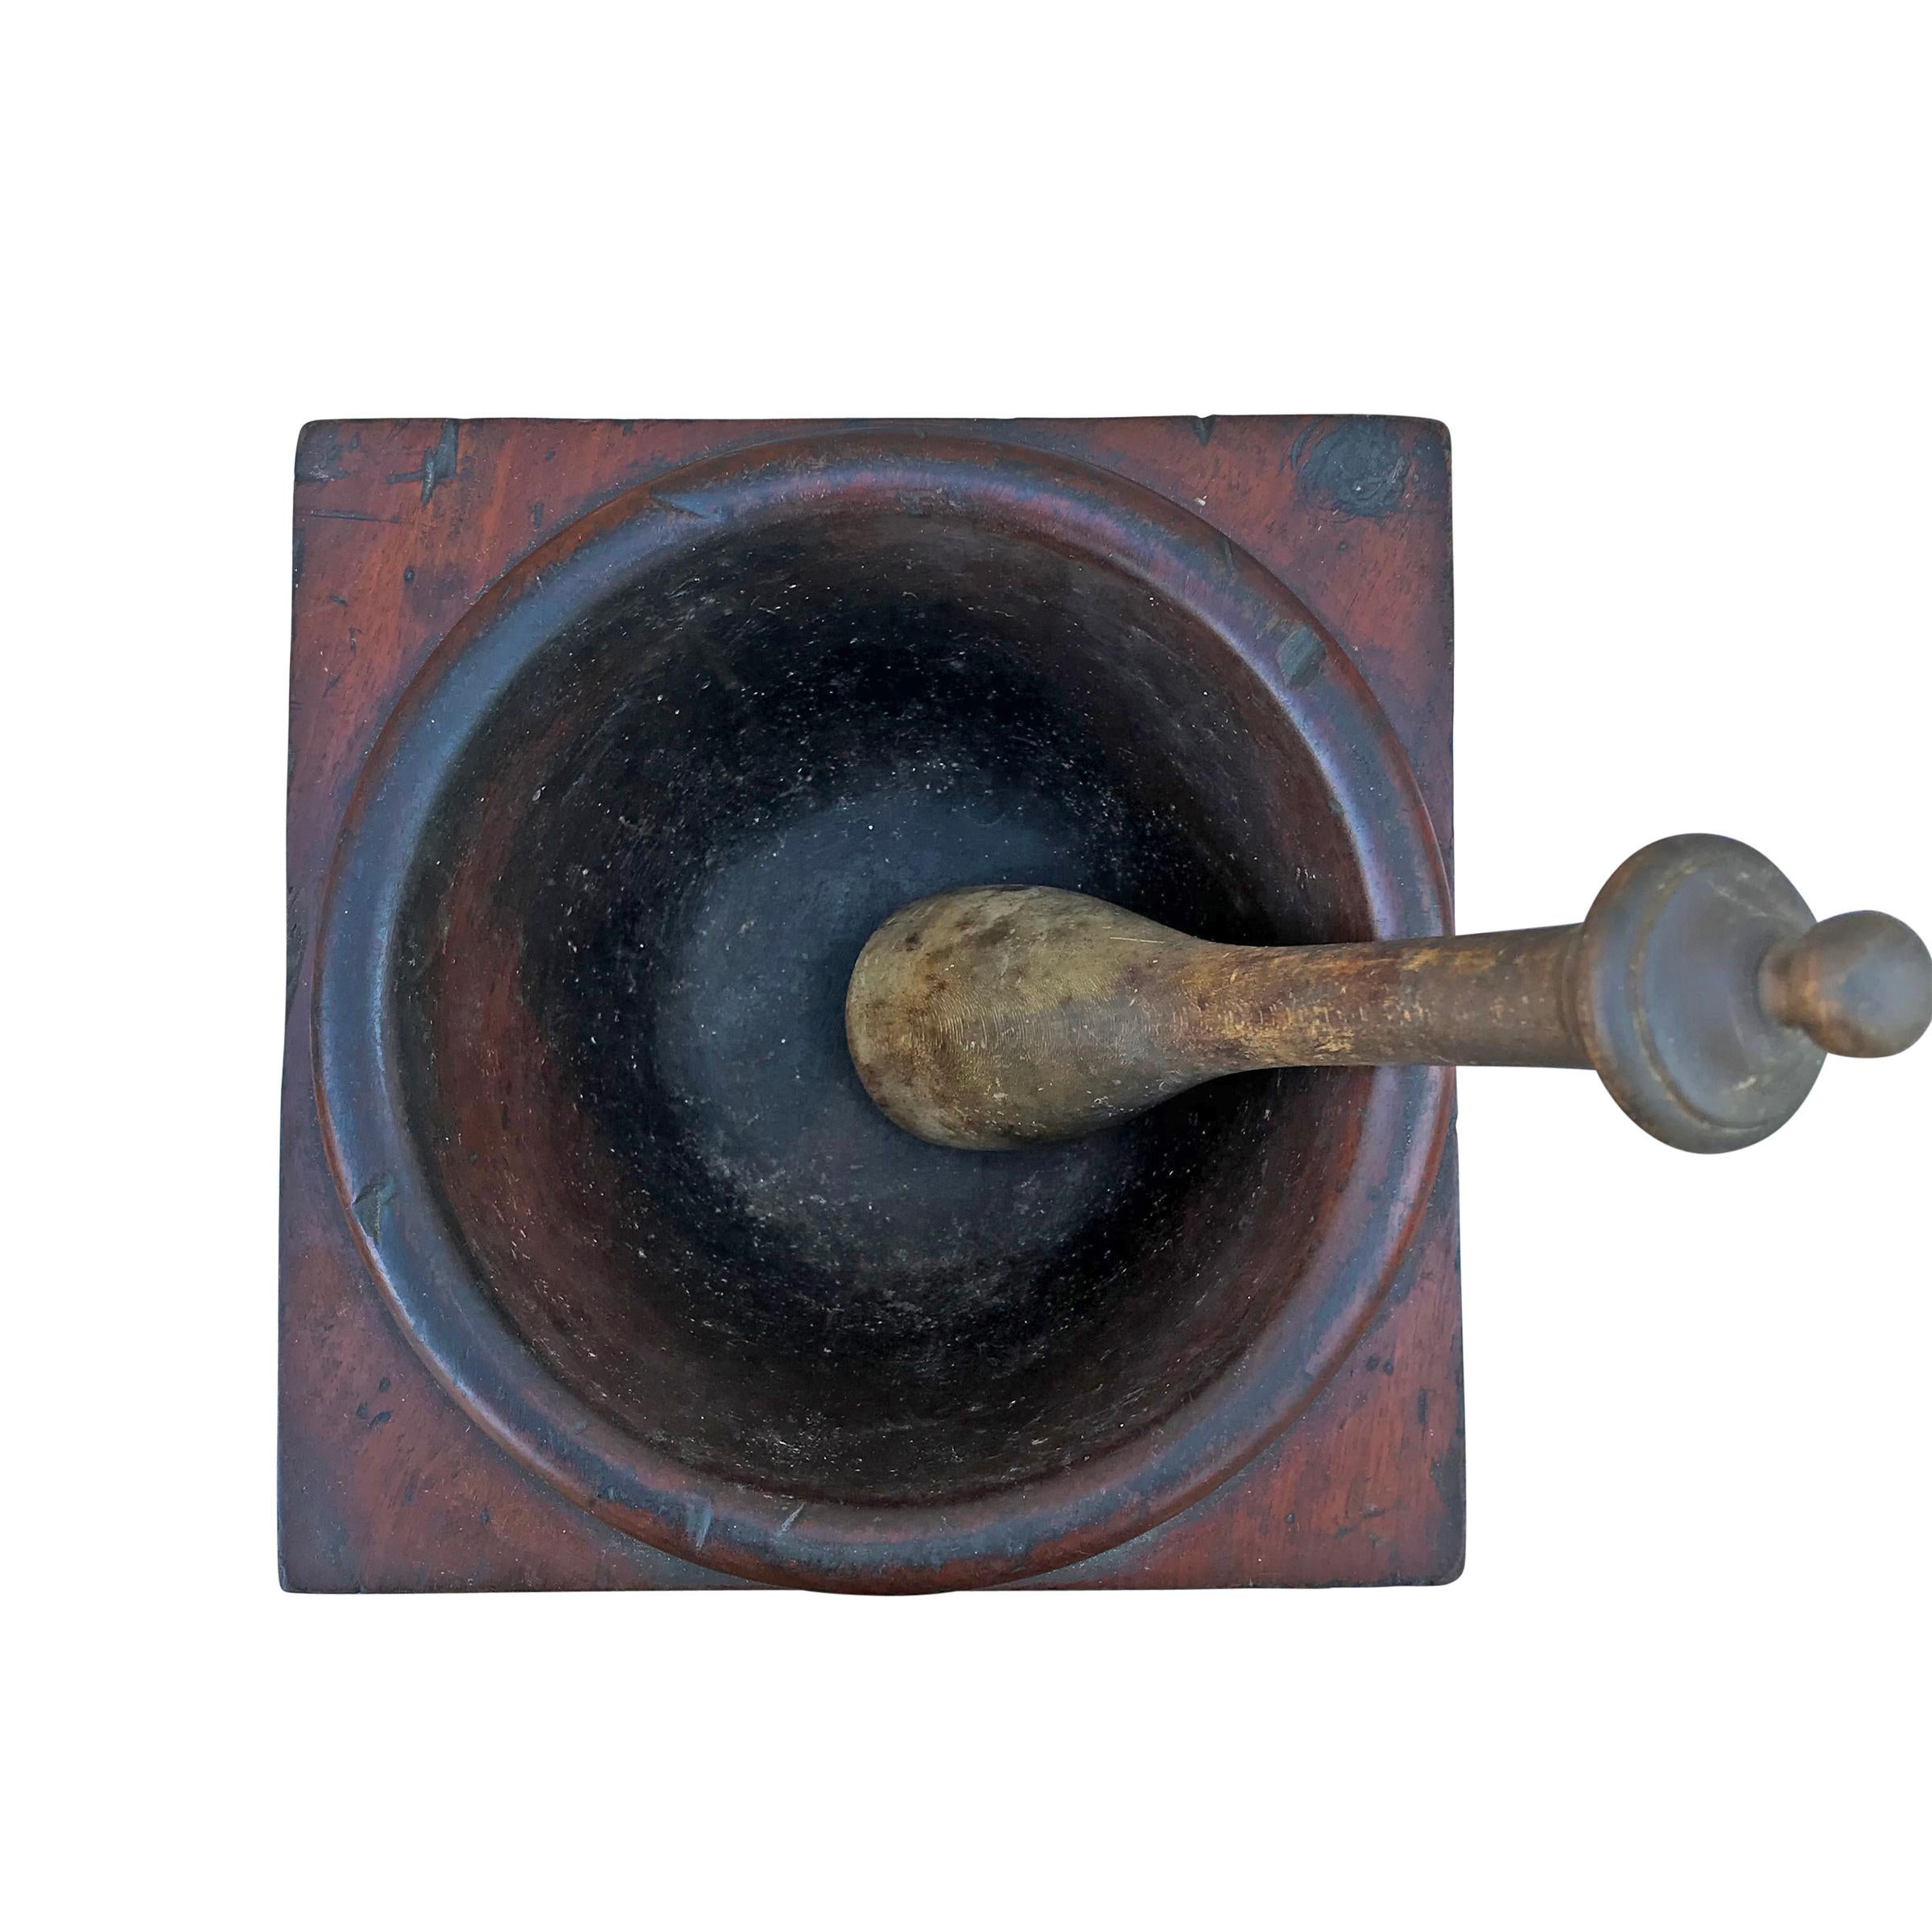 Primitive 19th Century Kitchen Mortar and Pestle For Sale